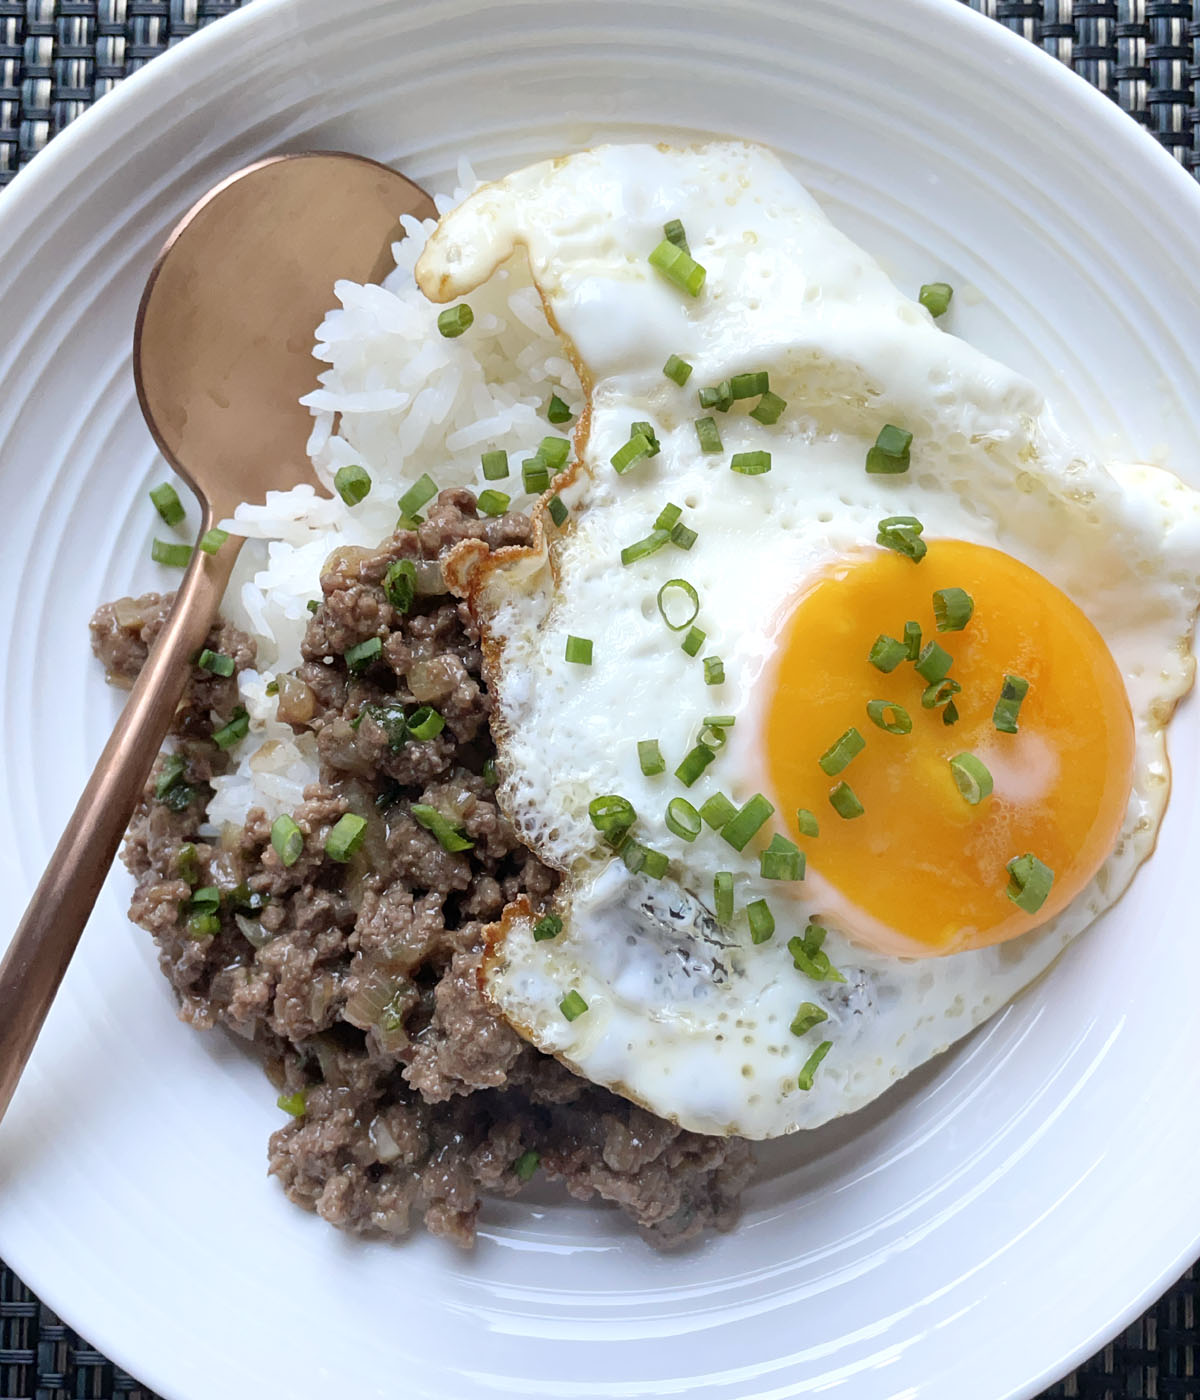 A round white dish containing a bronze colored spoon, white cooked rice, ground meat, and a sunny-side up fried egg, topped with chopped green onions.